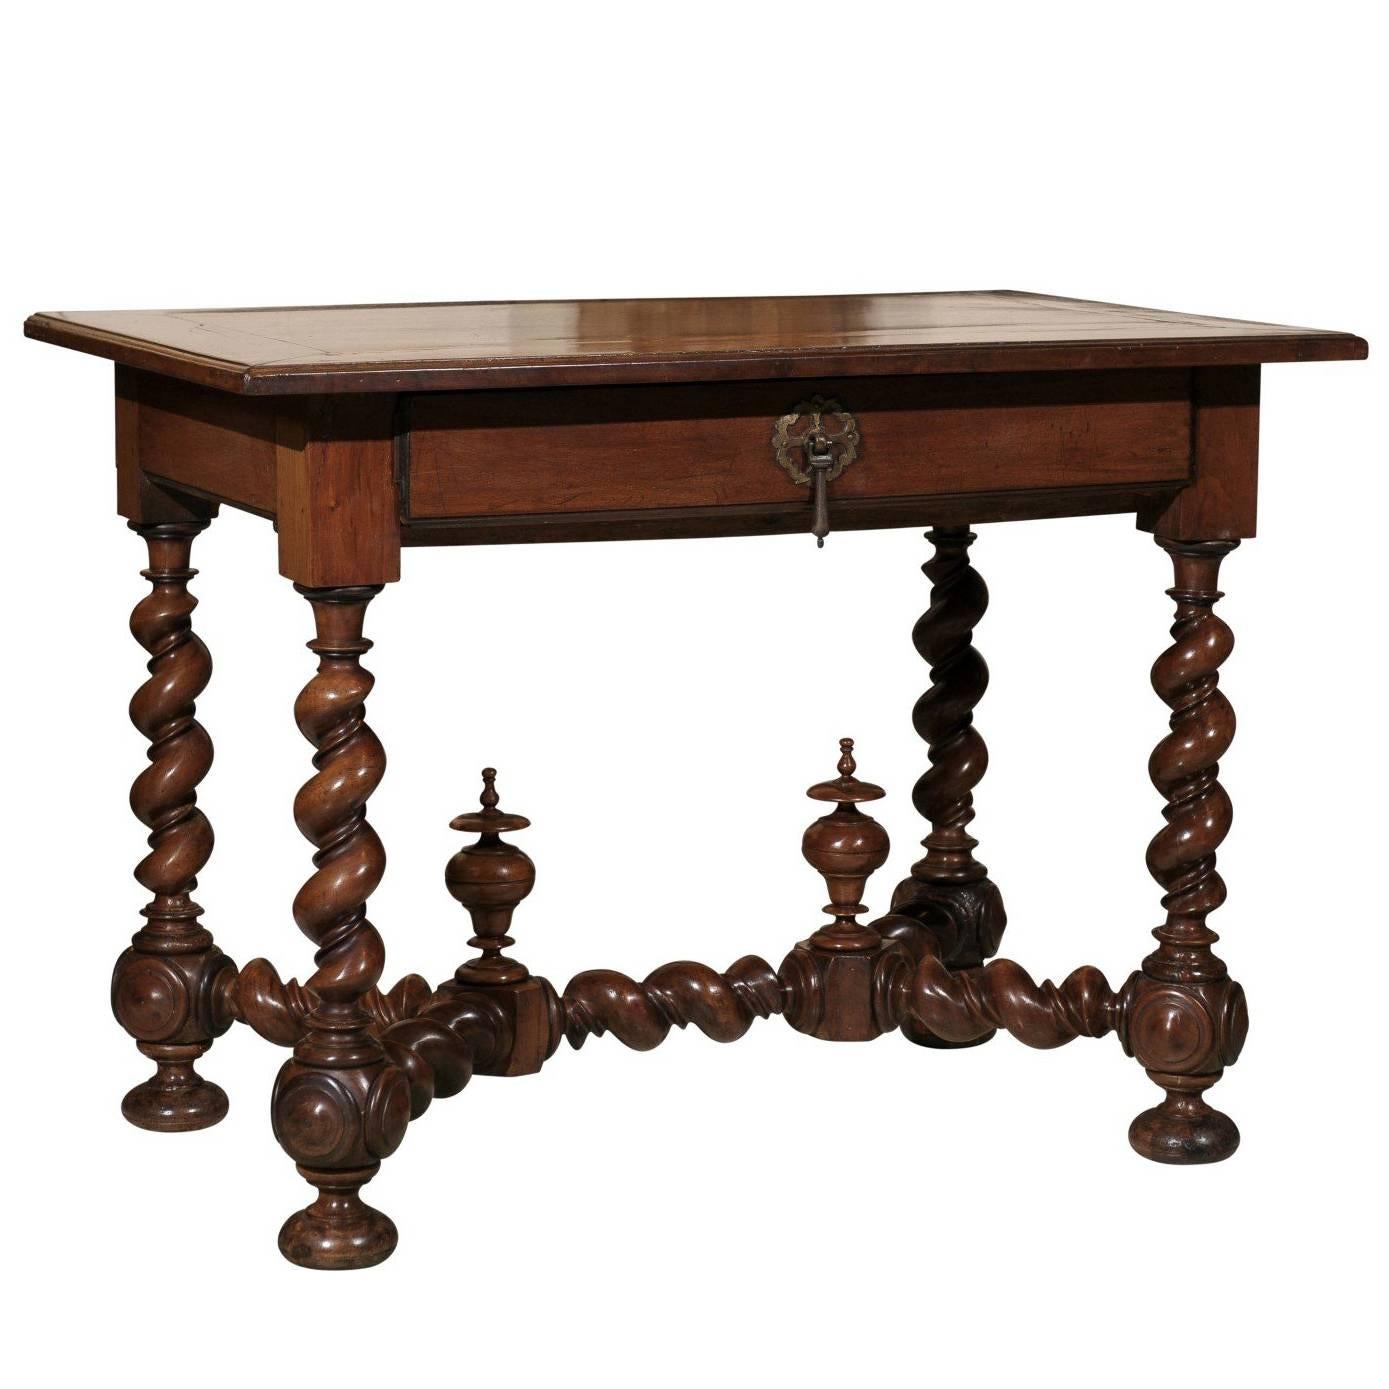 18th Century French Walnut Table with Drawer and Barley Twist Legs